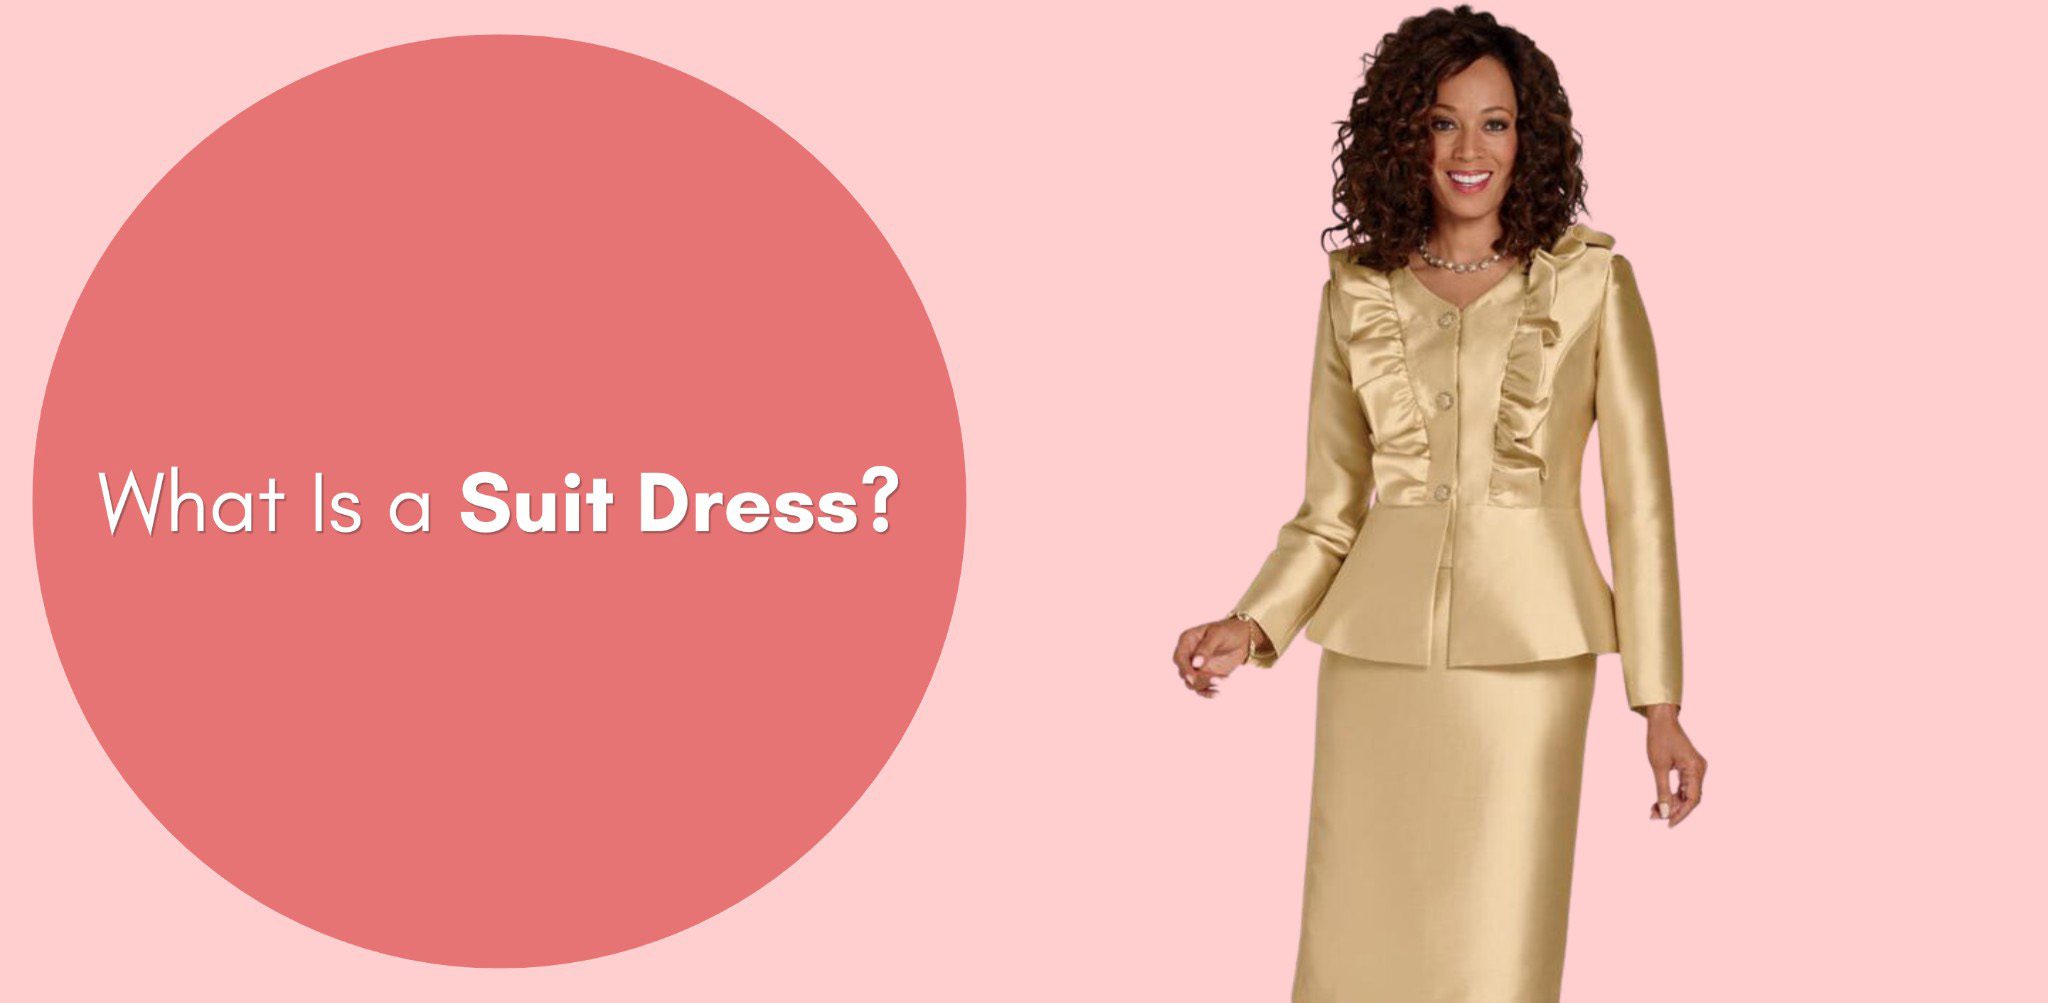 What Is a Suit Dress?